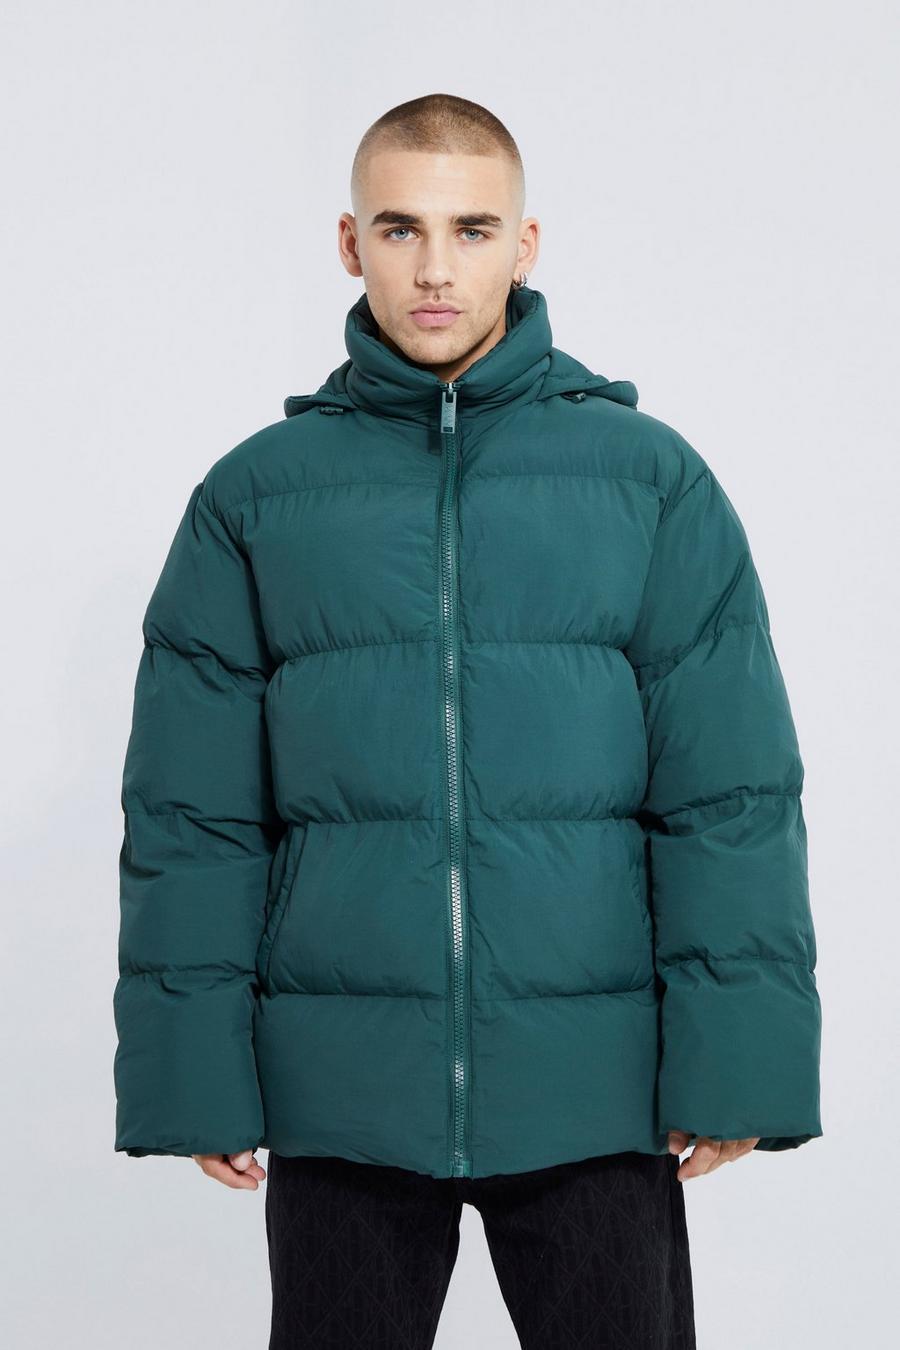 Forest green Oversized Soft Hooded Puffer